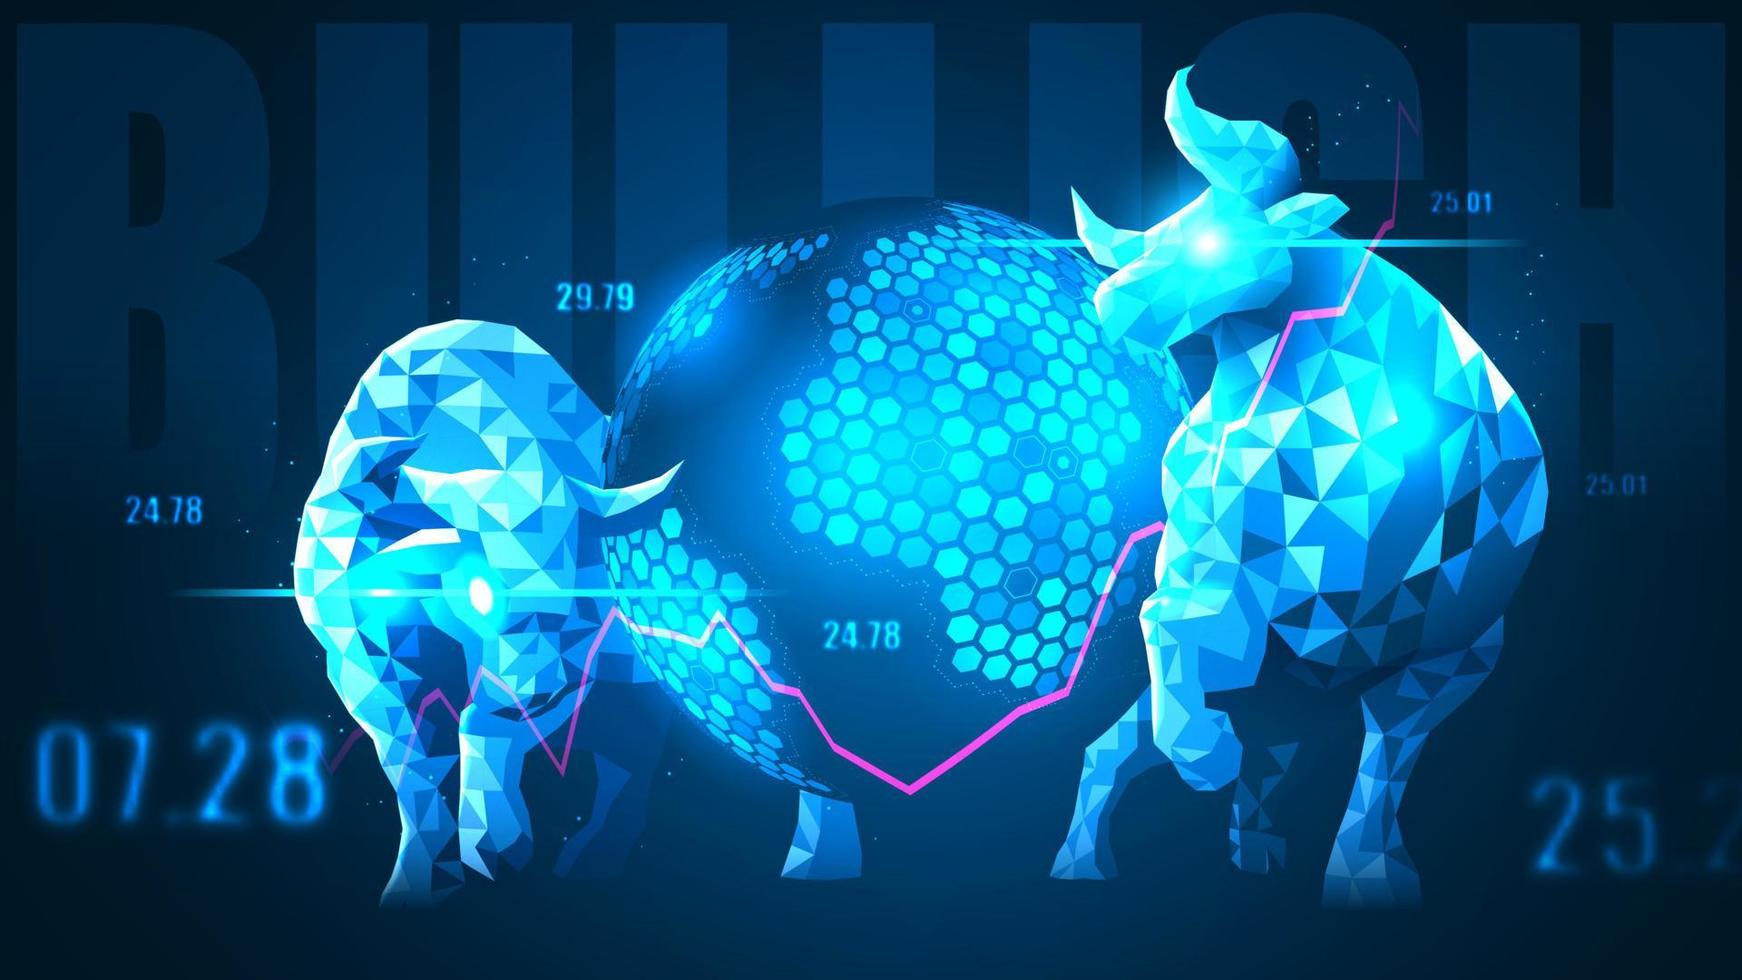 Concept art of Global Financial Bullish trend in futuristic idea suitable for Stock Marketing or Financial Investment vector